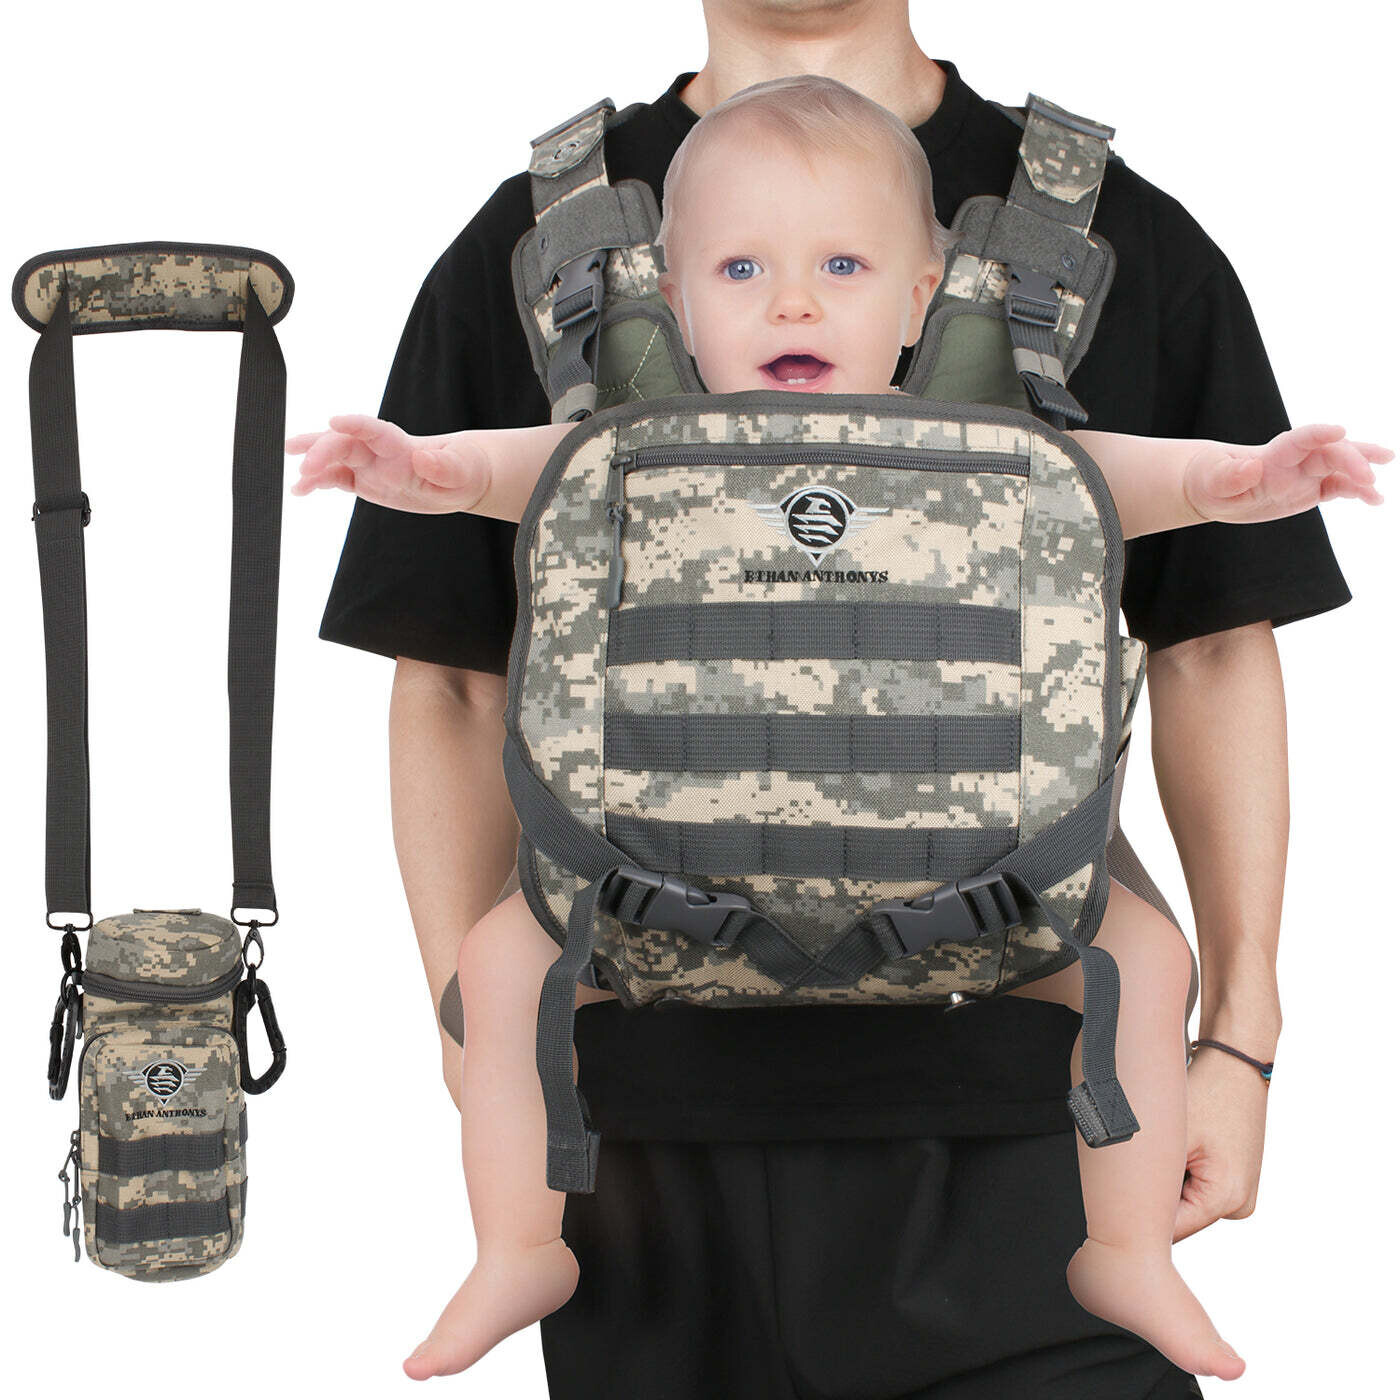 ETHAN ANTHONYS TACTICAL BABY CARRIER